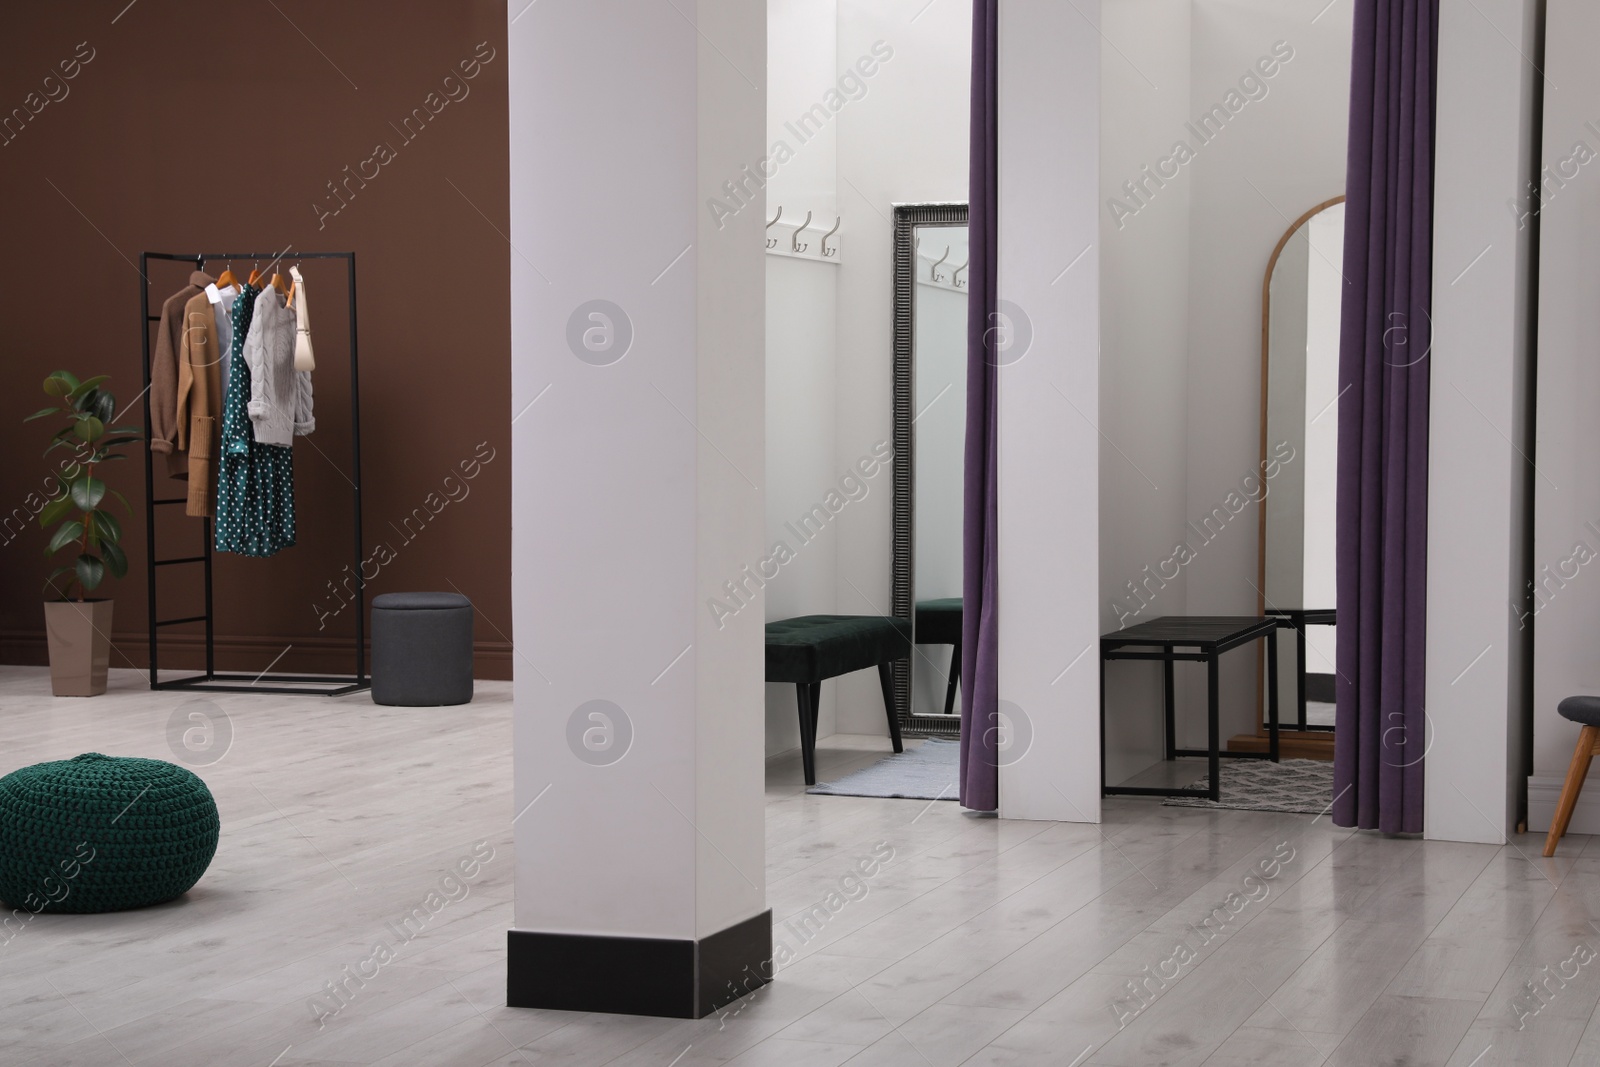 Photo of Empty dressing rooms in fashion store. Stylish interior